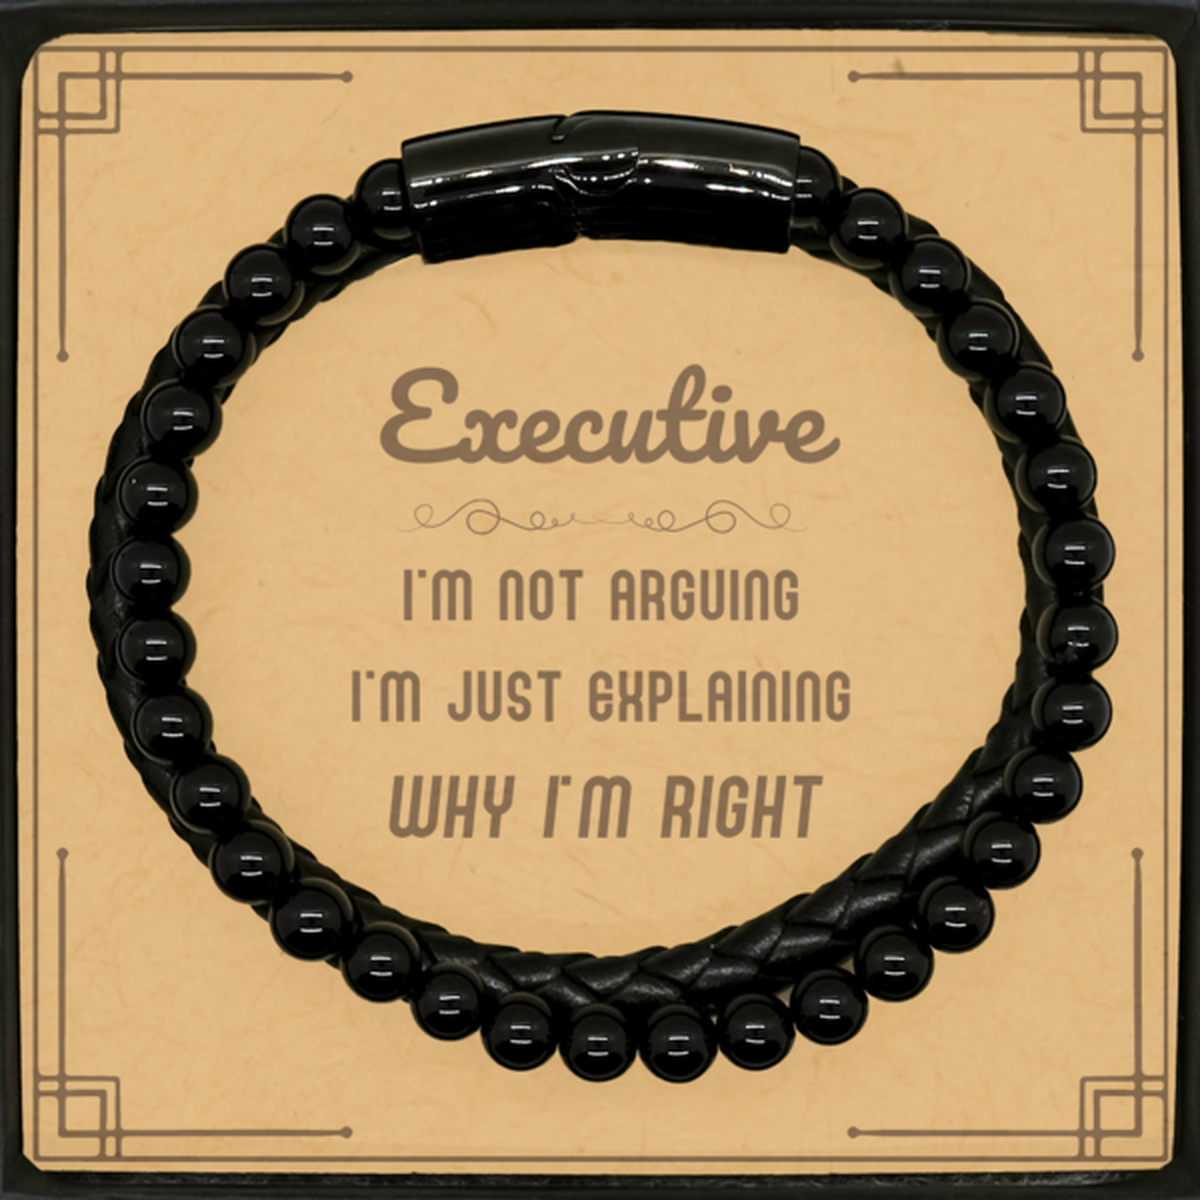 Executive I'm not Arguing. I'm Just Explaining Why I'm RIGHT Stone Leather Bracelets, Funny Saying Quote Executive Gifts For Executive Message Card Graduation Birthday Christmas Gifts for Men Women Coworker